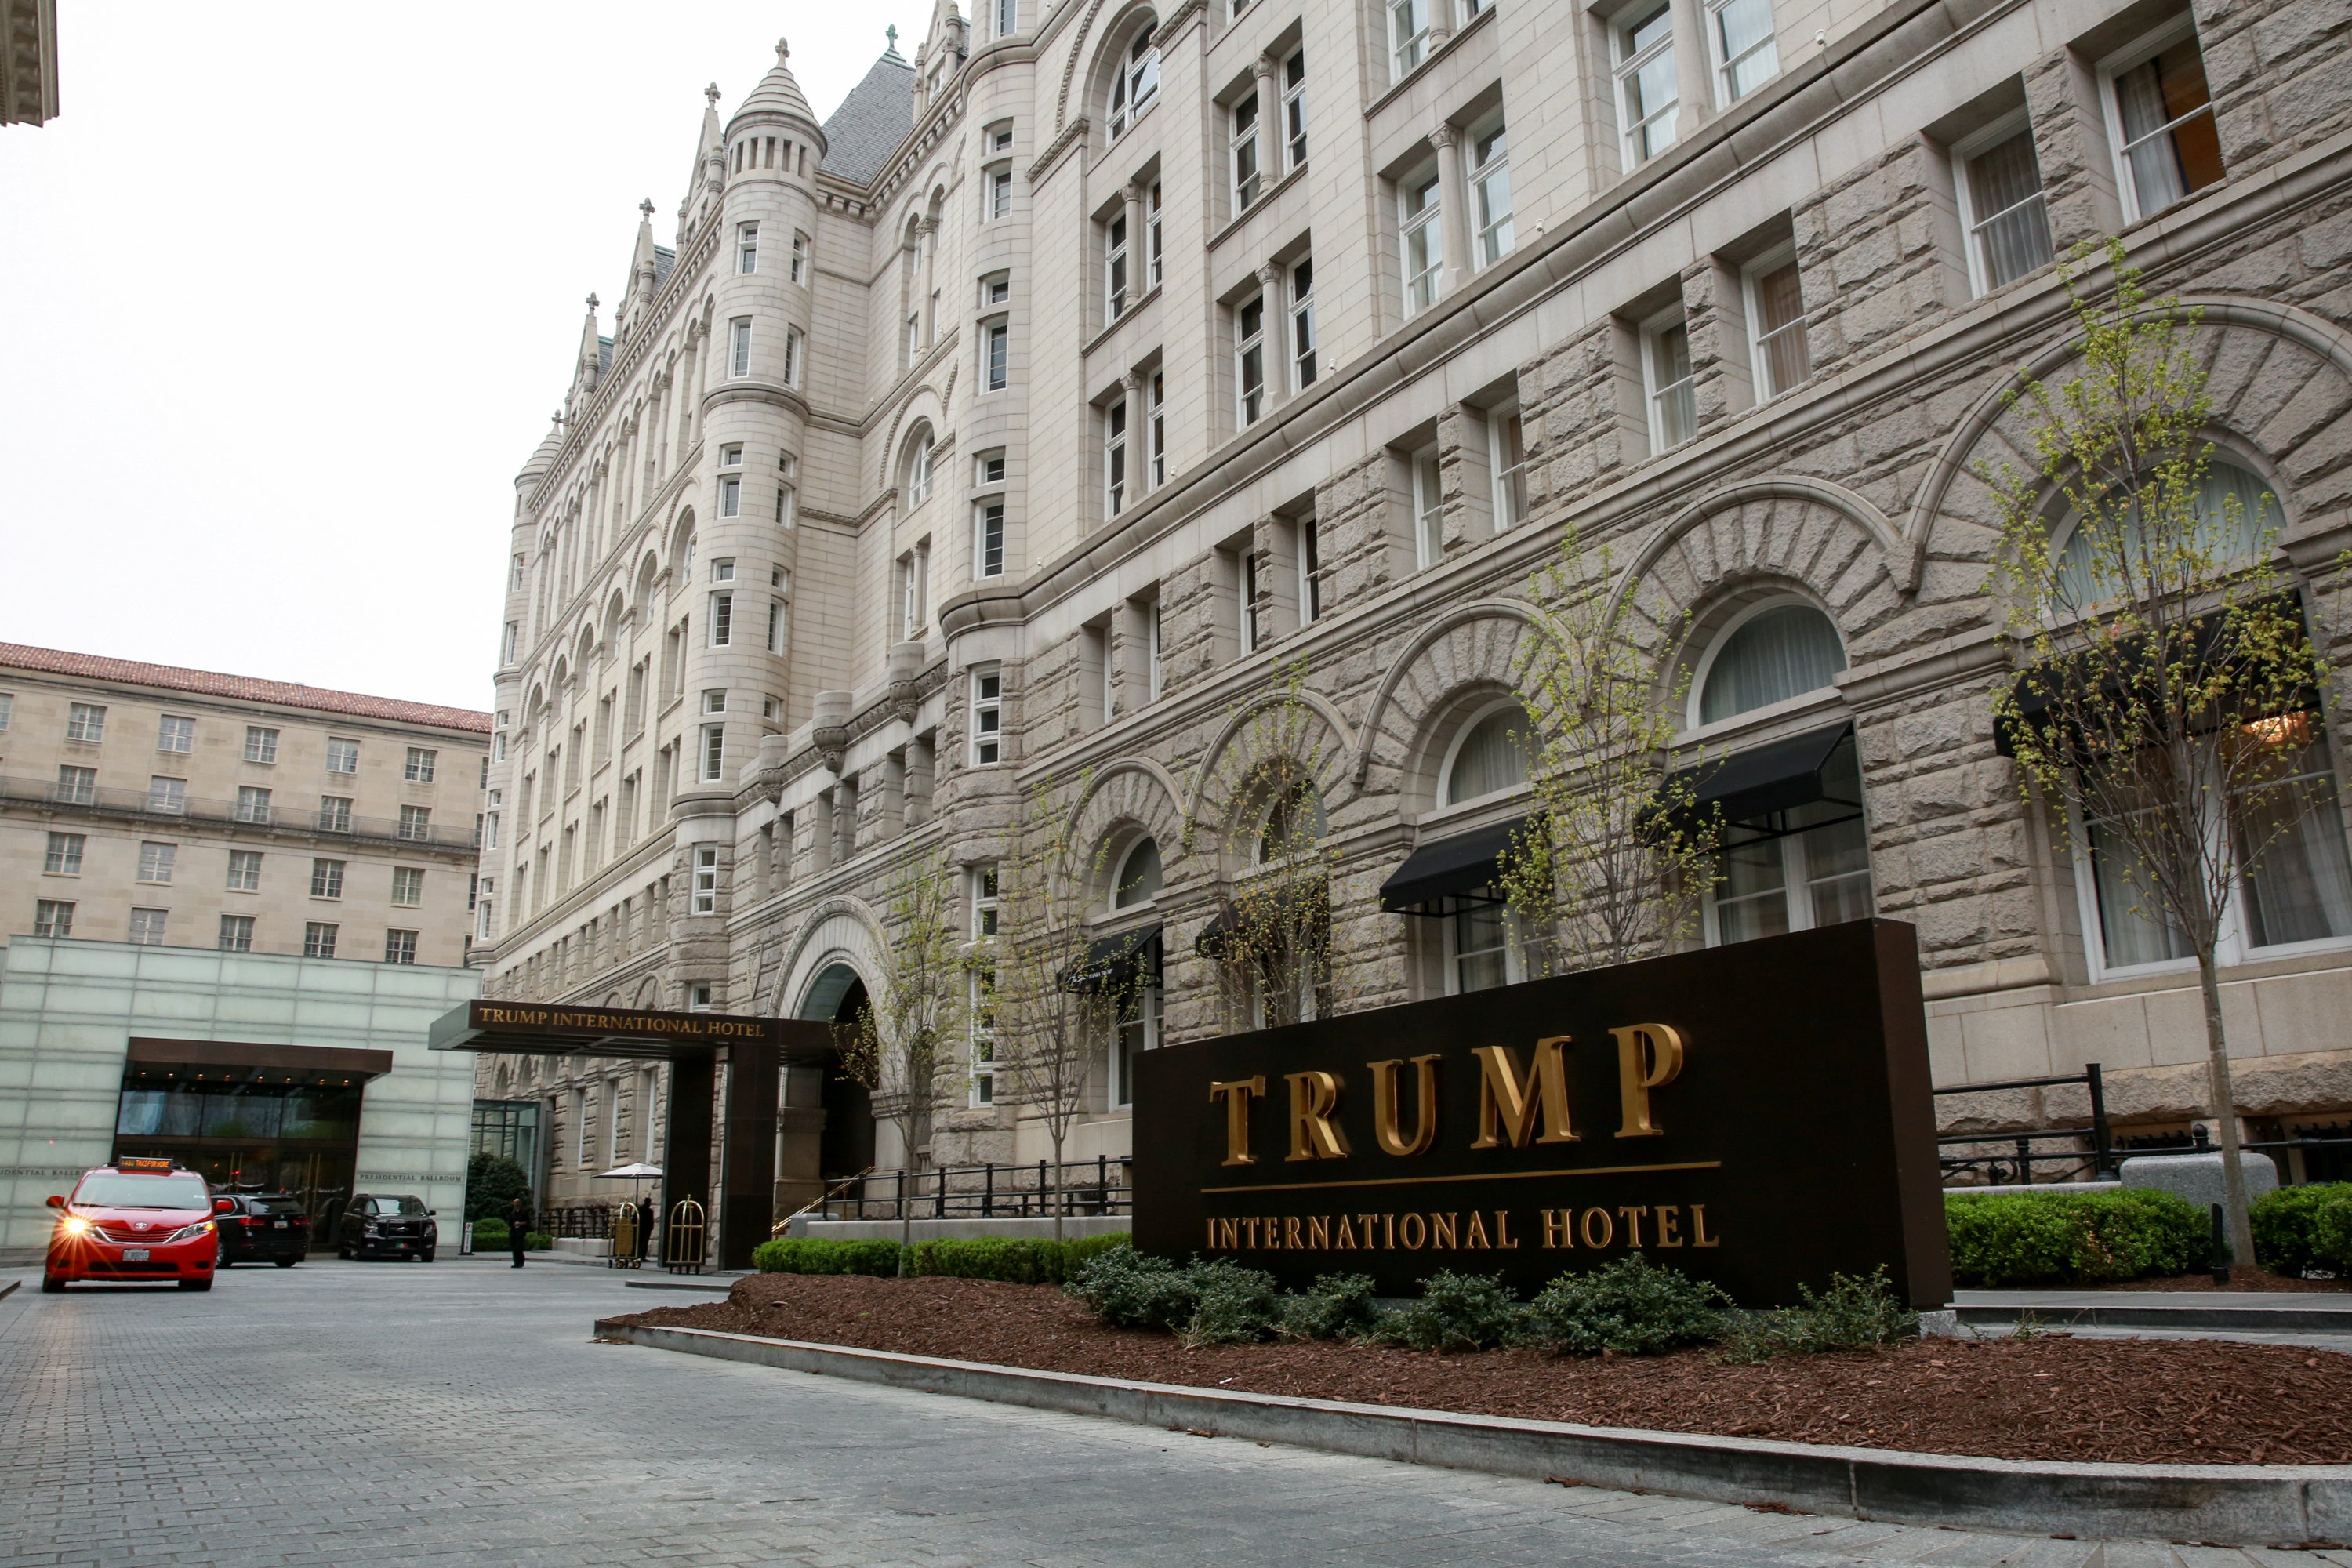 Trump International Hotel in Washington, DC had recently opened its bookings for rooms during the inauguration week